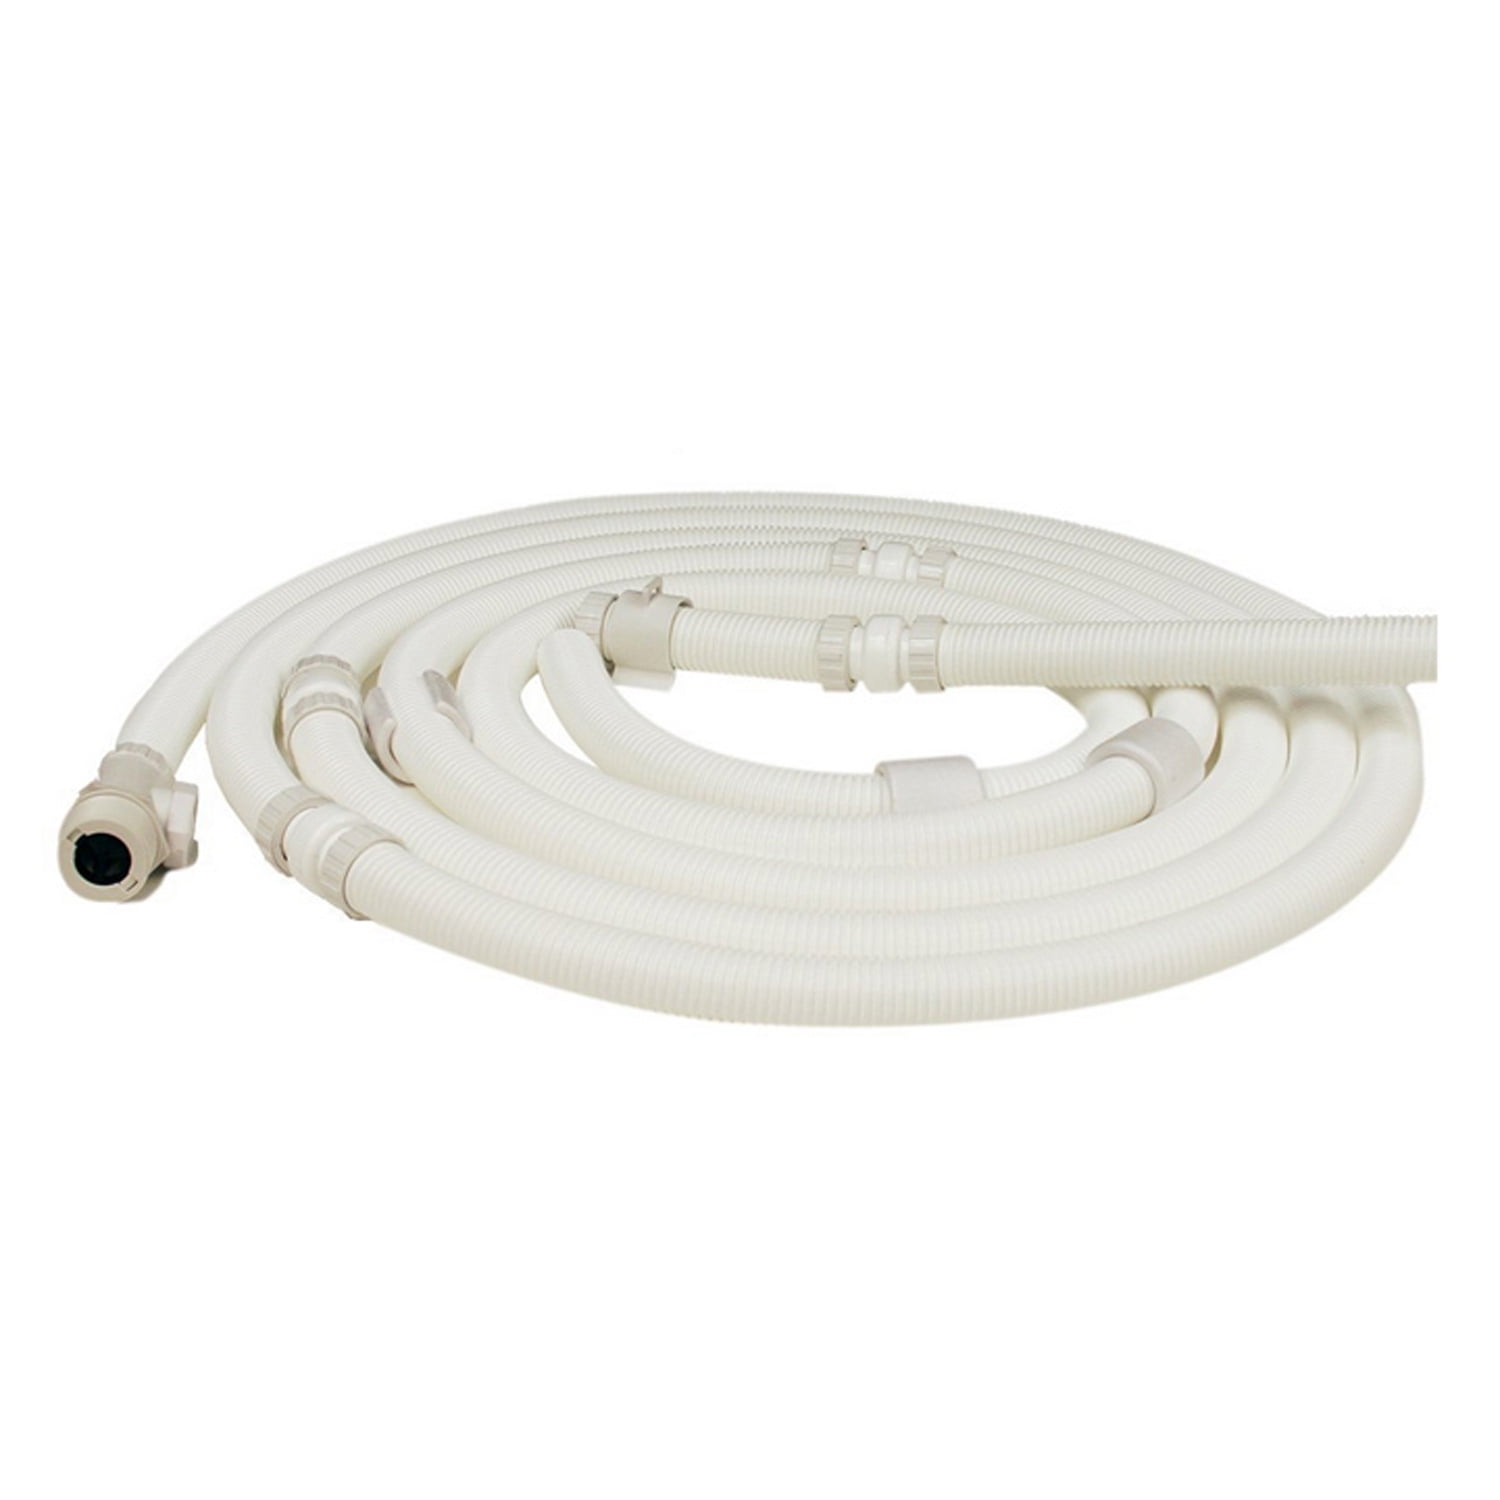 RO6G Pool Cleaner 6-Ft Cuffless Feed Hose Replacement for Polaris 360 Cleaner 9-100-3102 ONLY 360 1-1/2 Diameter.